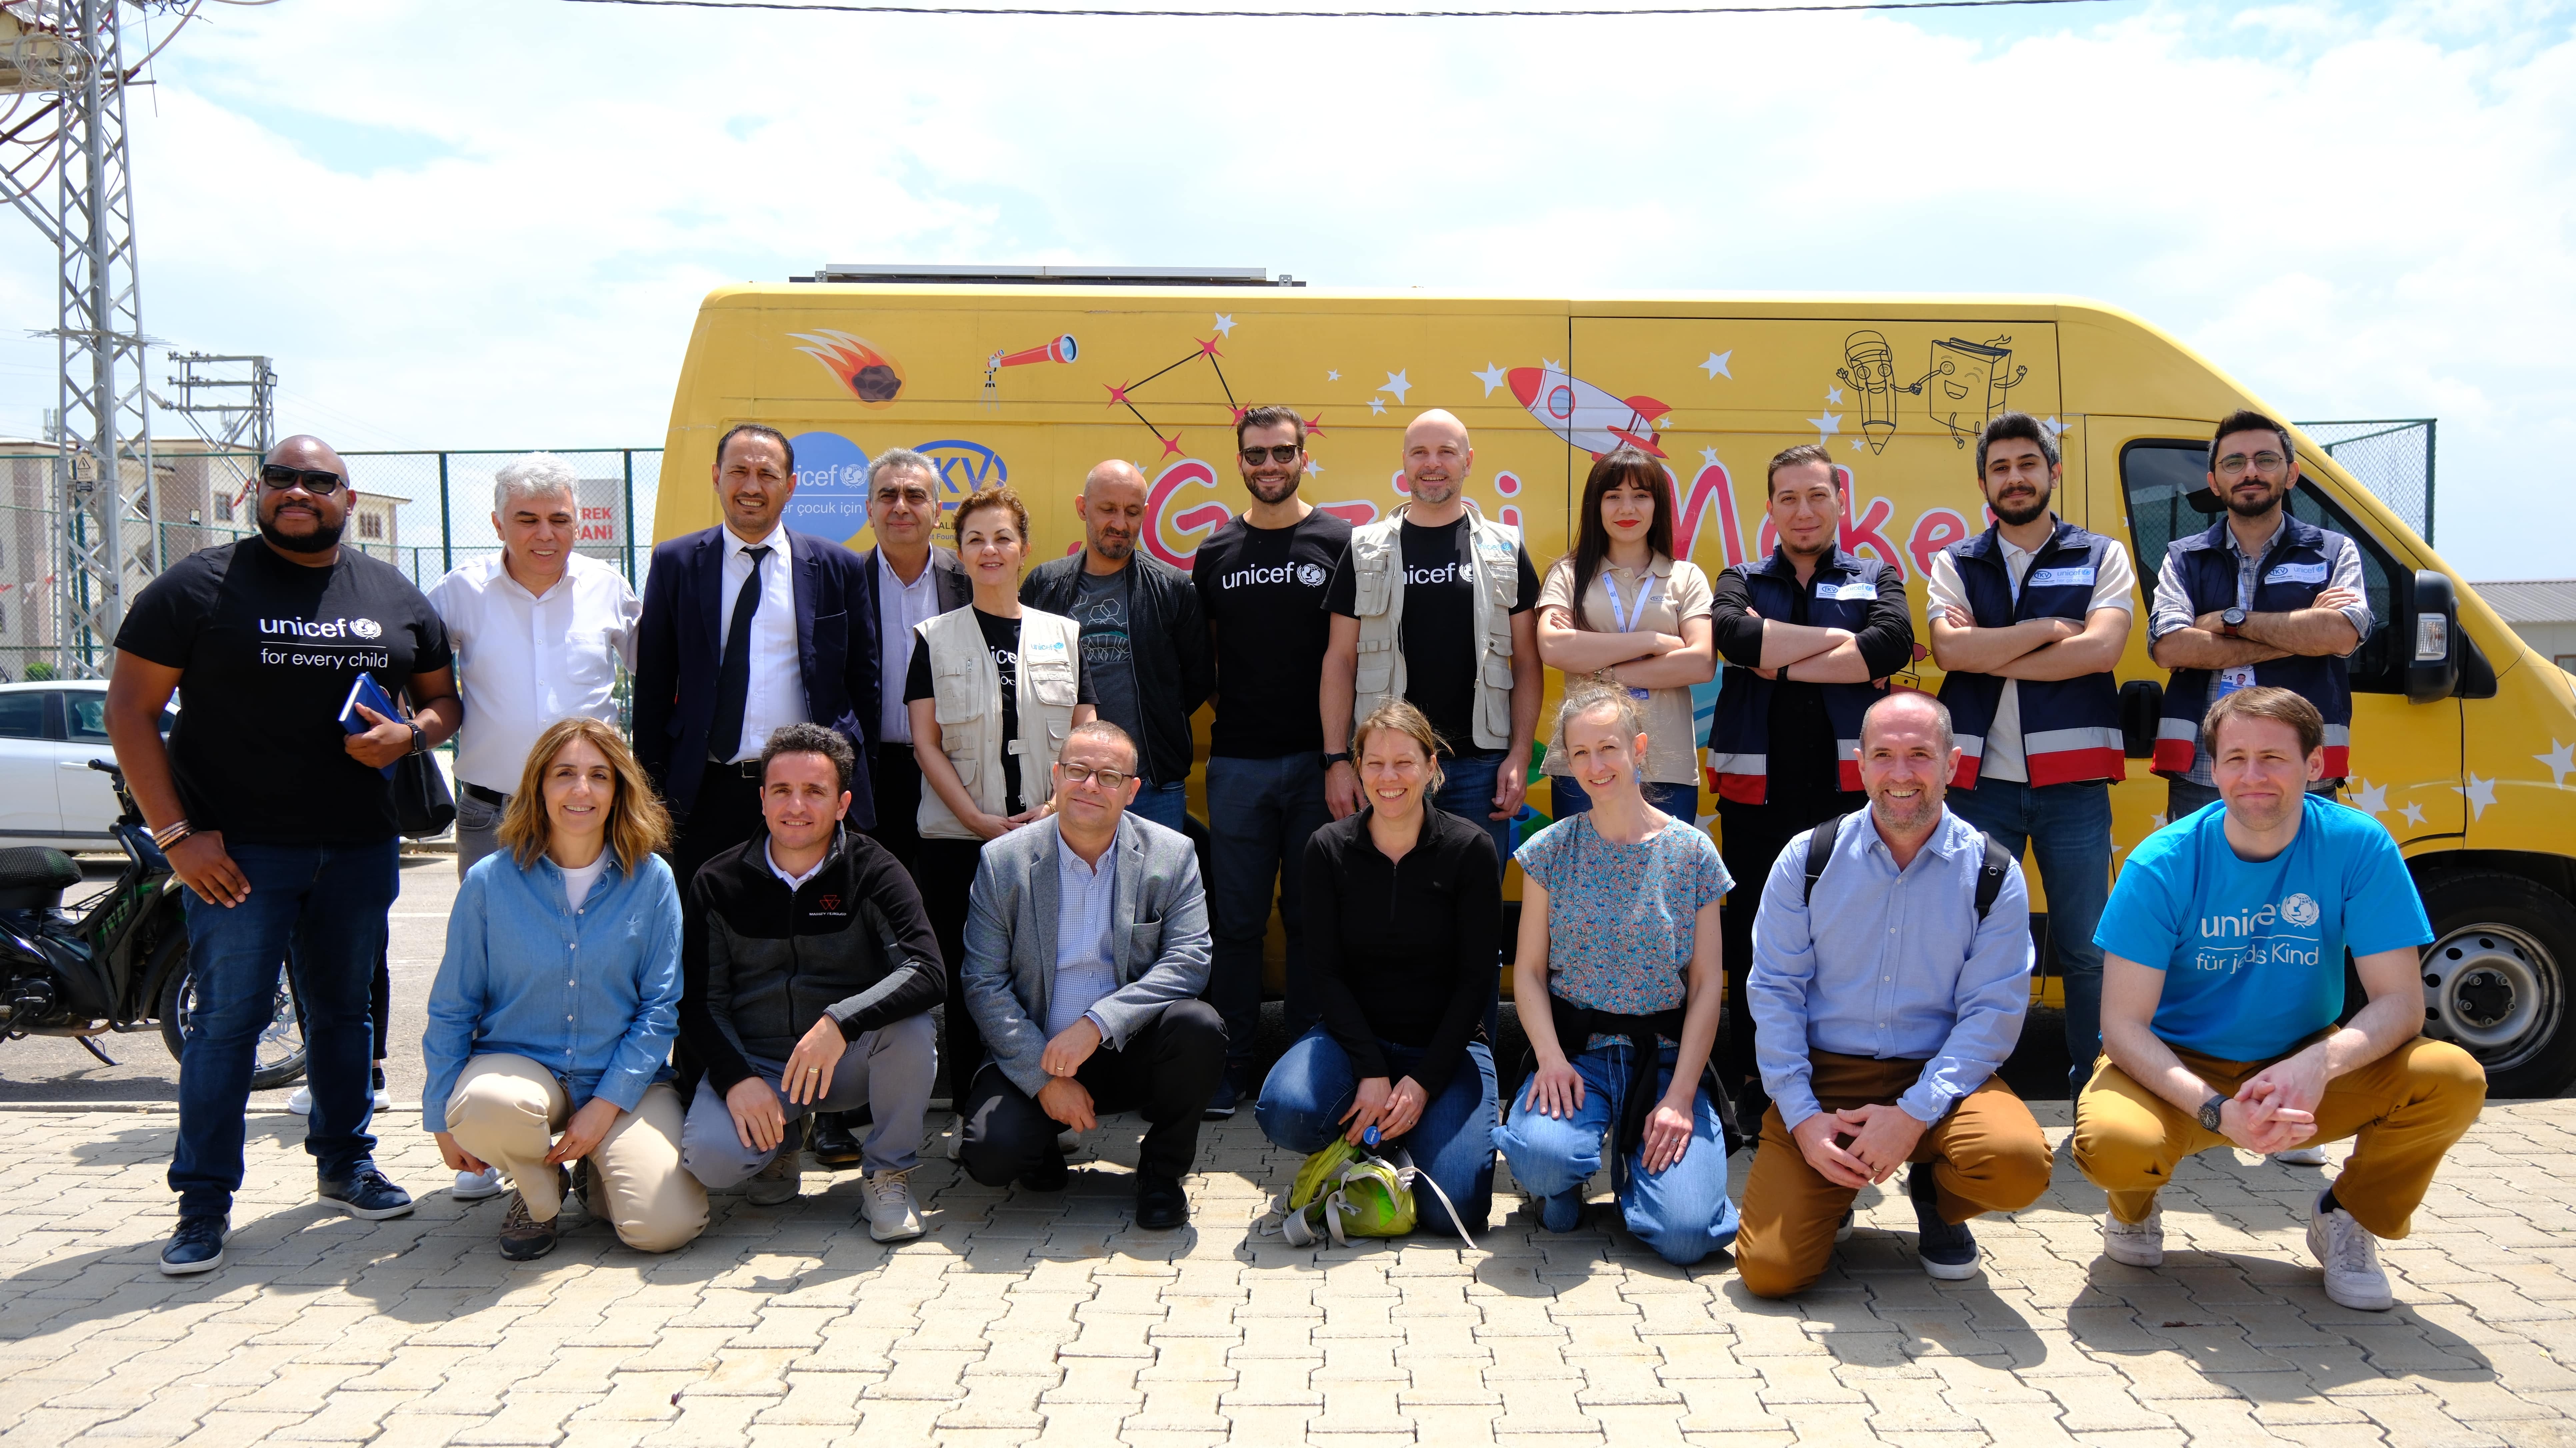 UNICEF German National Committee and AGCO Corporation Delegation Examined the Mobile Maker Program in Gaziantep